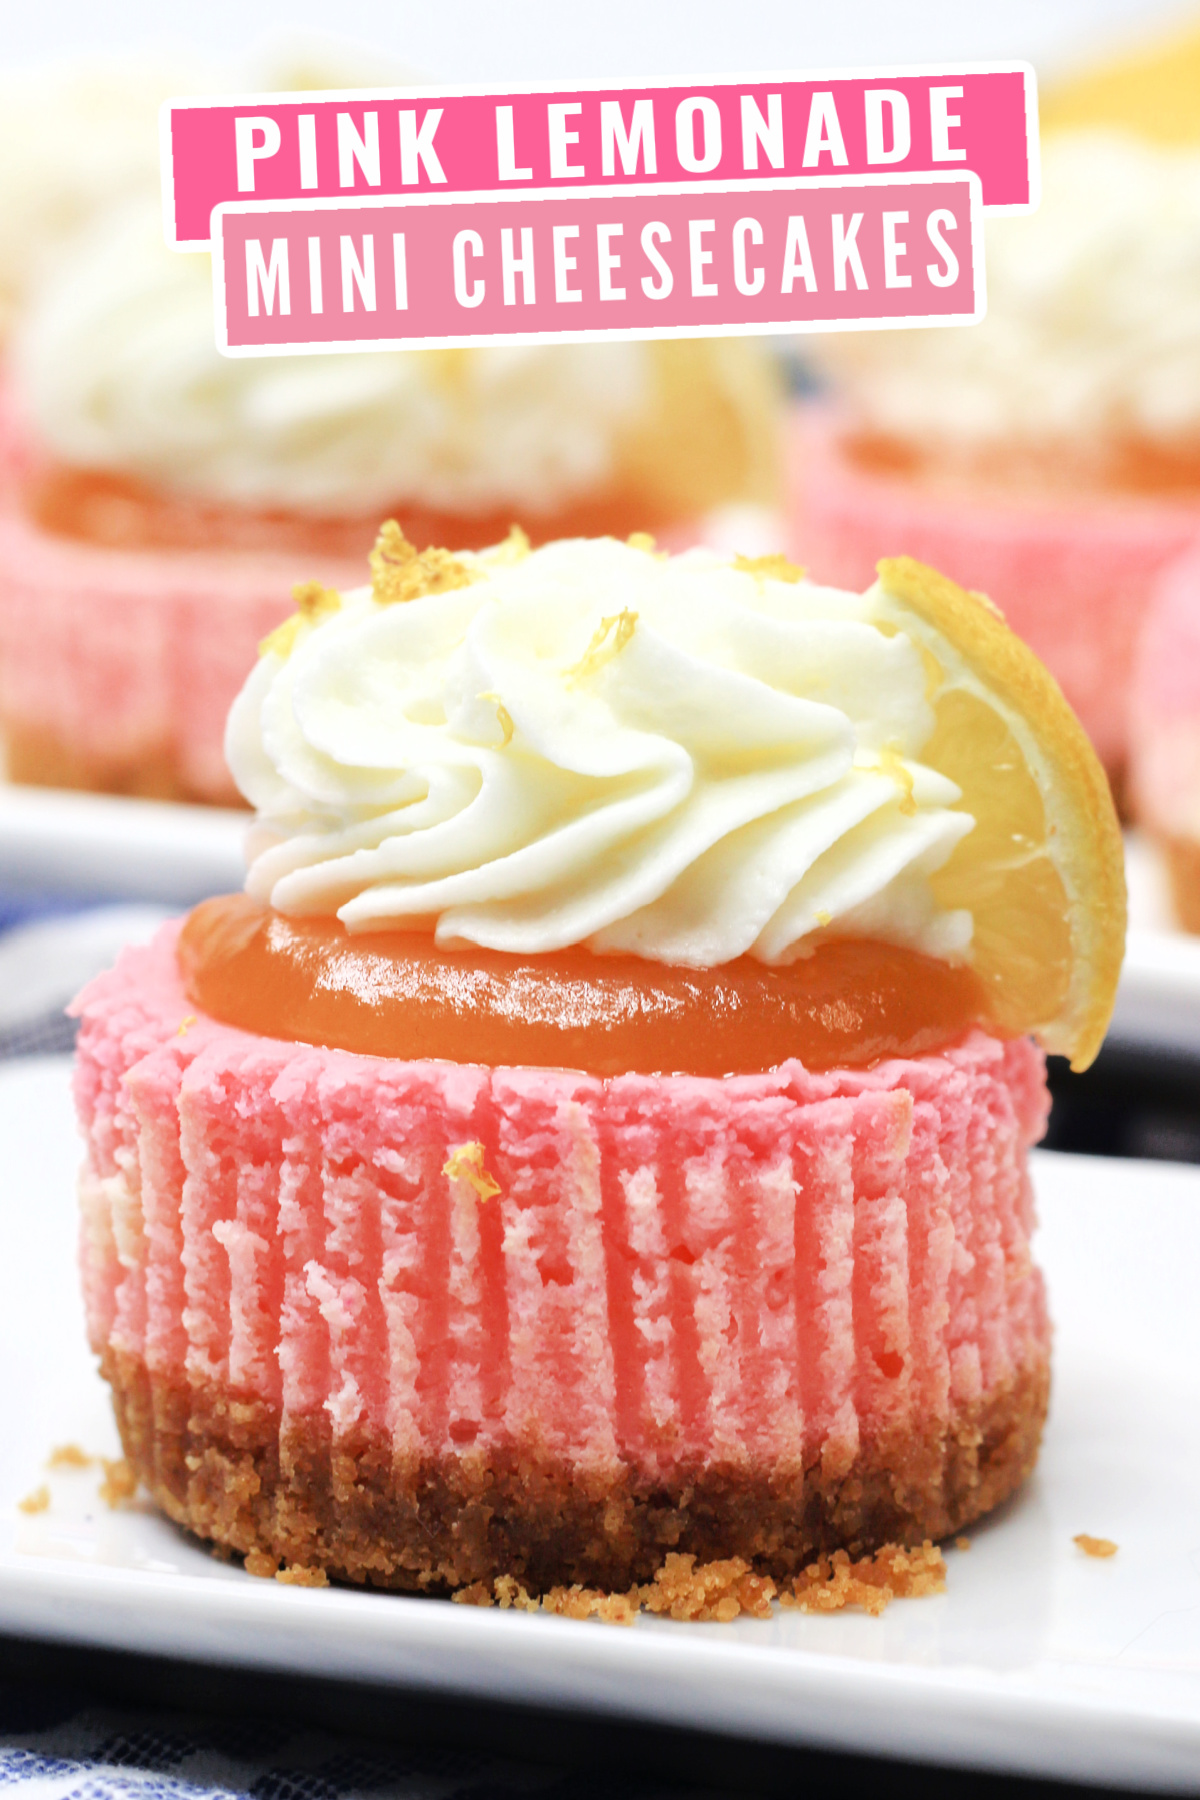 Pink Lemonade Mini Cheesecakes Recipe, sweet, tangy little bites topped with lemon curd and whipped cream. Perfect for any occasion!